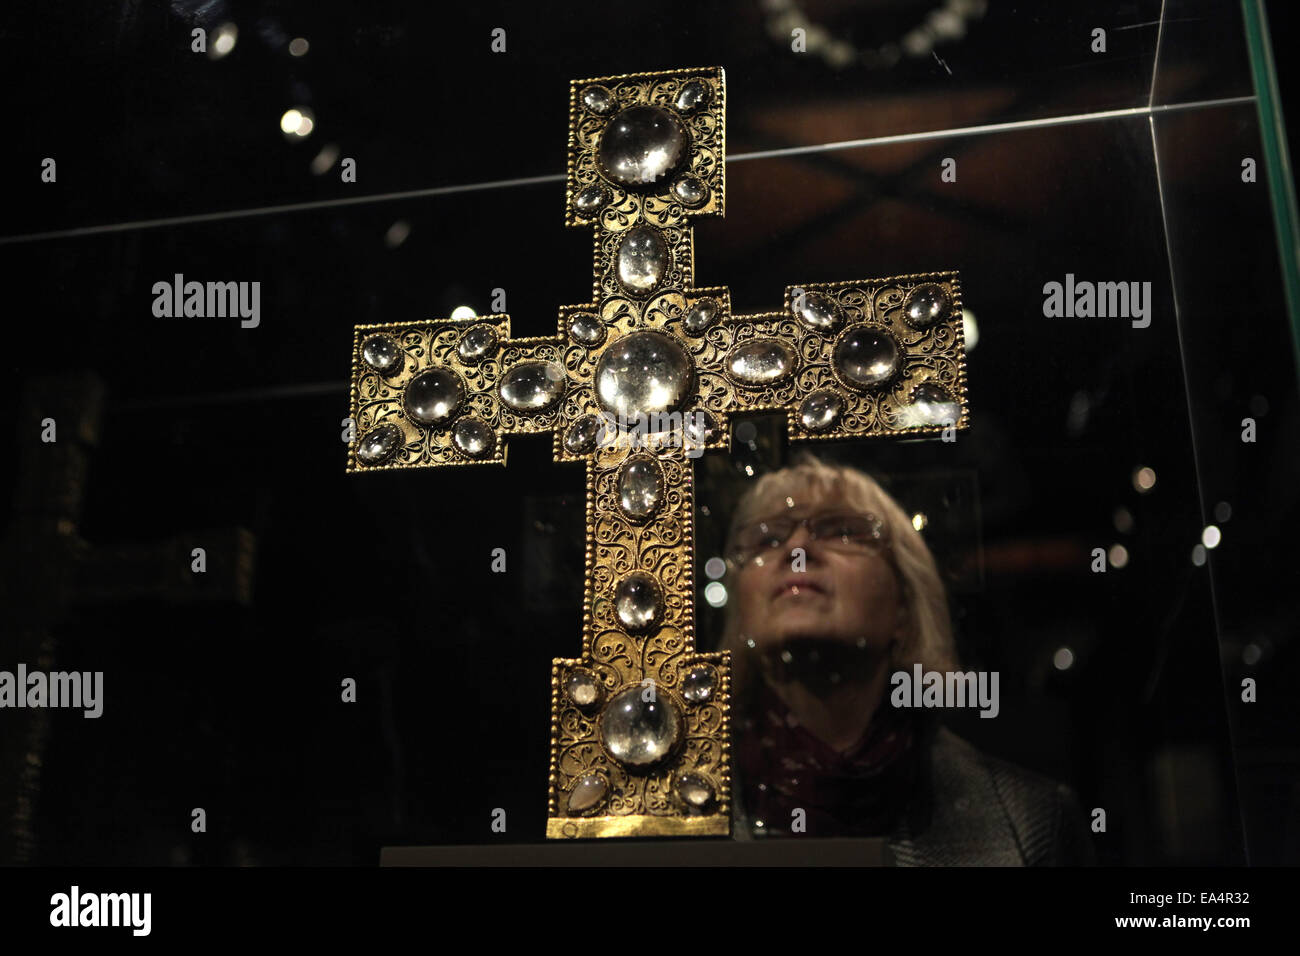 Prague, Czech Republic. 6th November 2014. A visitor examines a Romanesque reliquary procession cross during a press preview to the exhibition The Benedictines in the Heart of Europe in the National Gallery in Prague, Czech Republic. The exhibition entitled Open the Gate of Paradise presents an excellent selection of early medieval artefacts from year 800 to 1300. This reliquary procession cross from Roudnice was made in Prague or Swabia in the middle of the 12th century and now belongs to the Lobkowicz Collection. Stock Photo